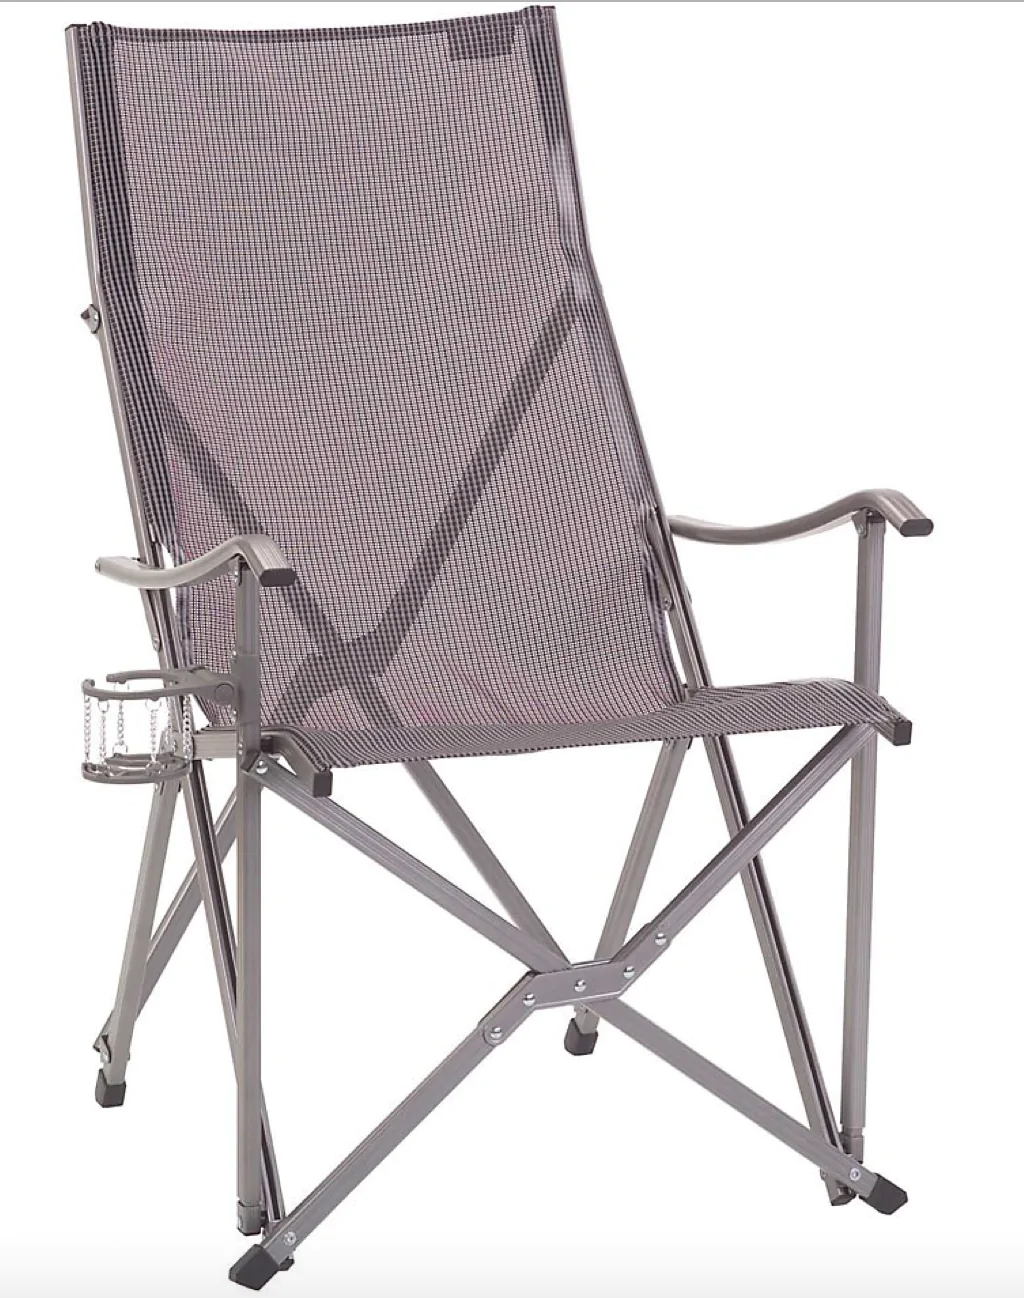 COLEMAN PATIO SLING CHAIR